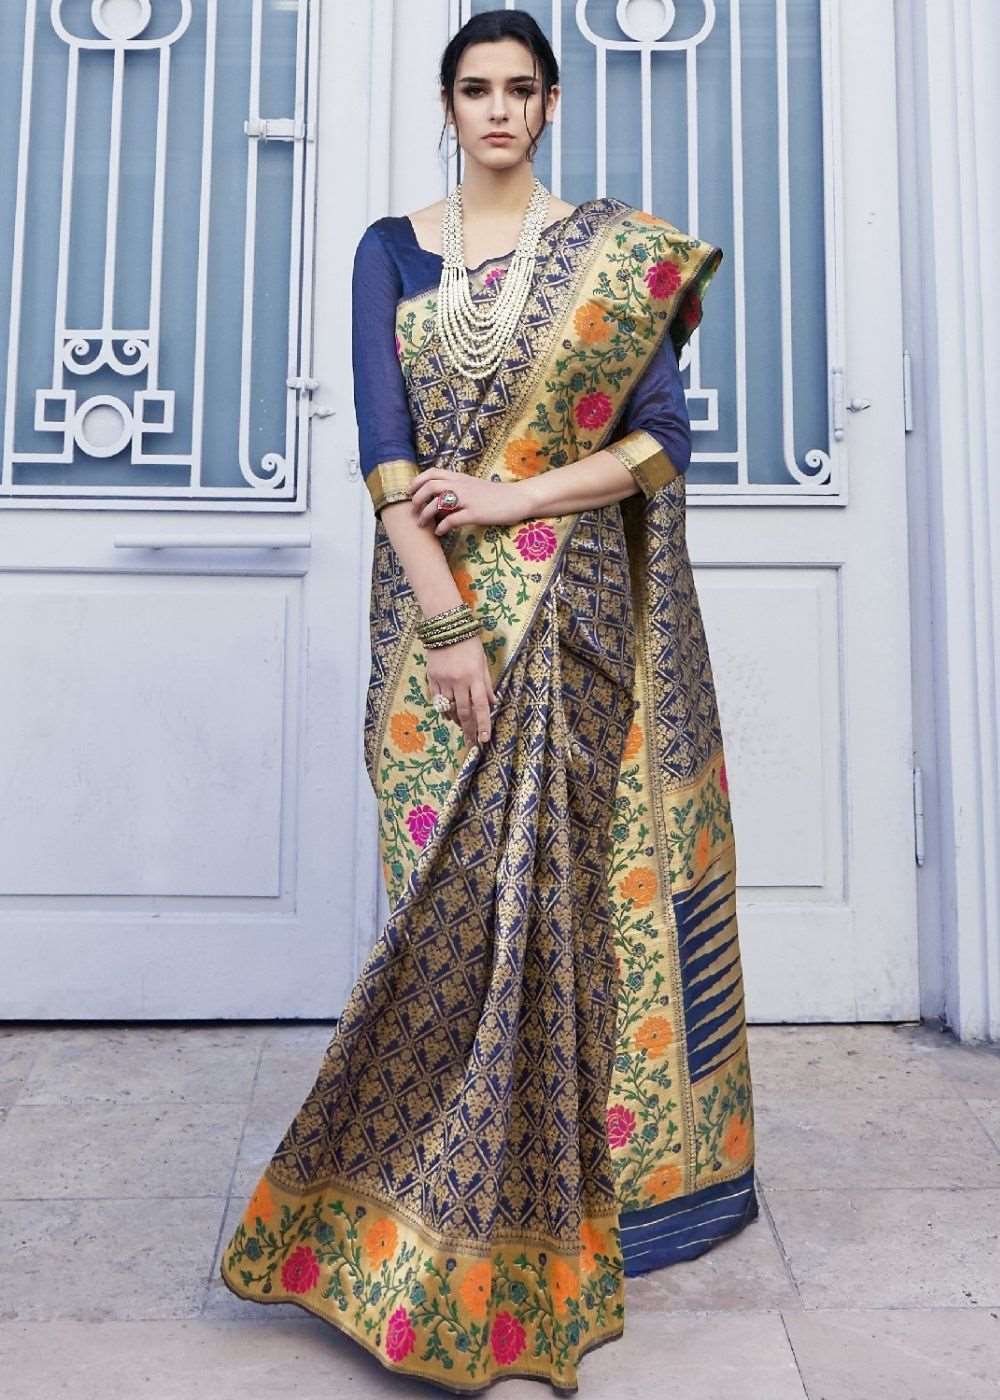 Azure Blue and Golden Blend Silk Saree with Floral Woven Border and Pallu - Colorful Saree